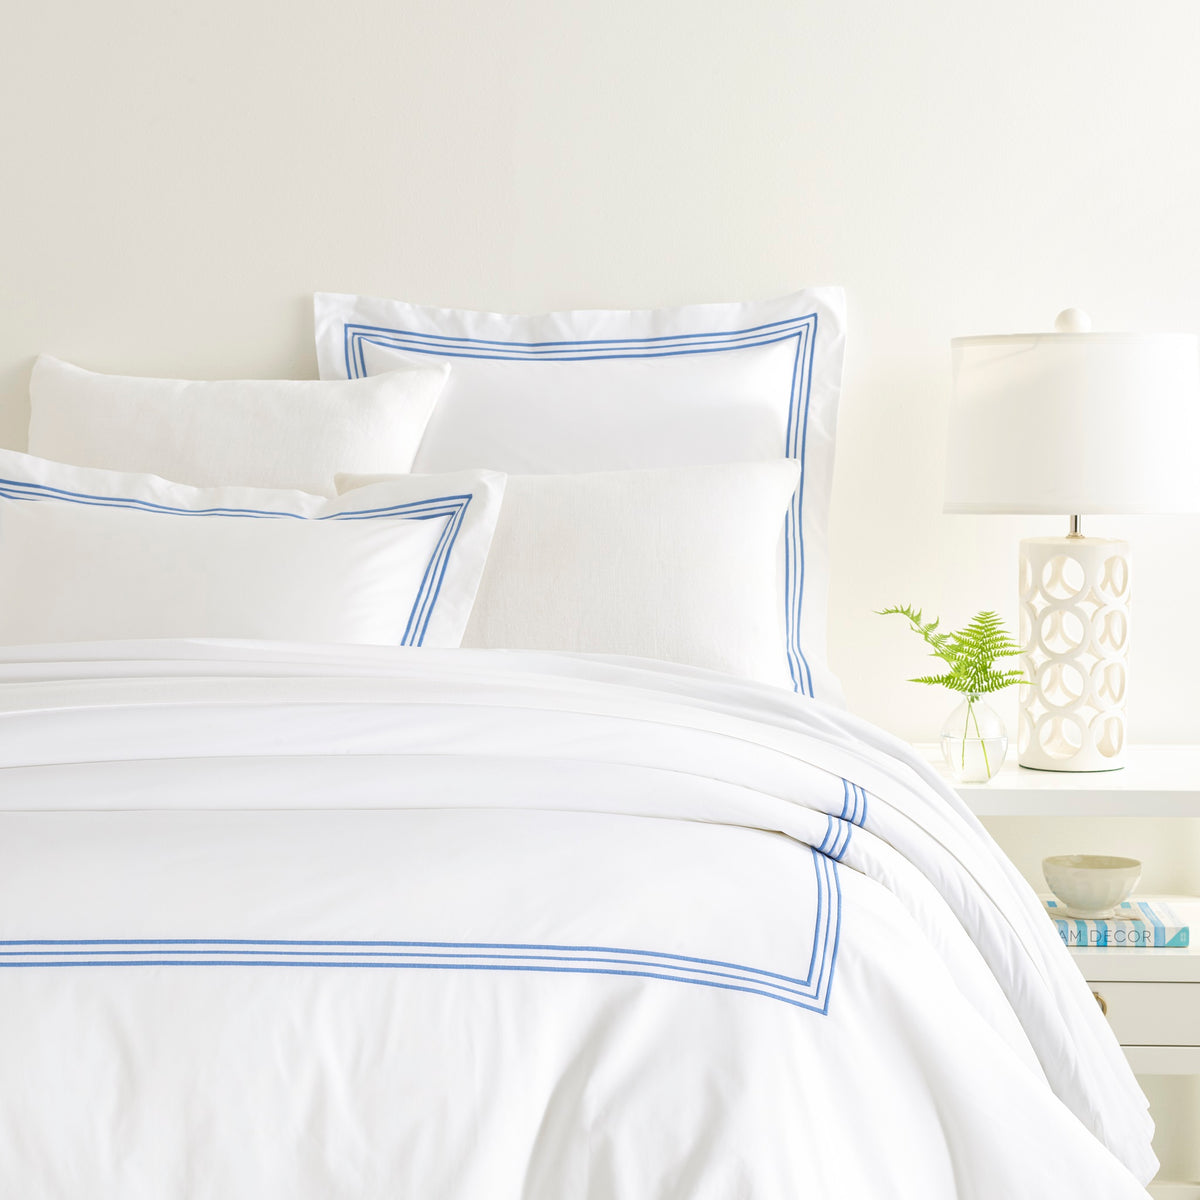 Duvet Cover of Pine Cone Hill Trio in Bed with Shams in Color French Blue